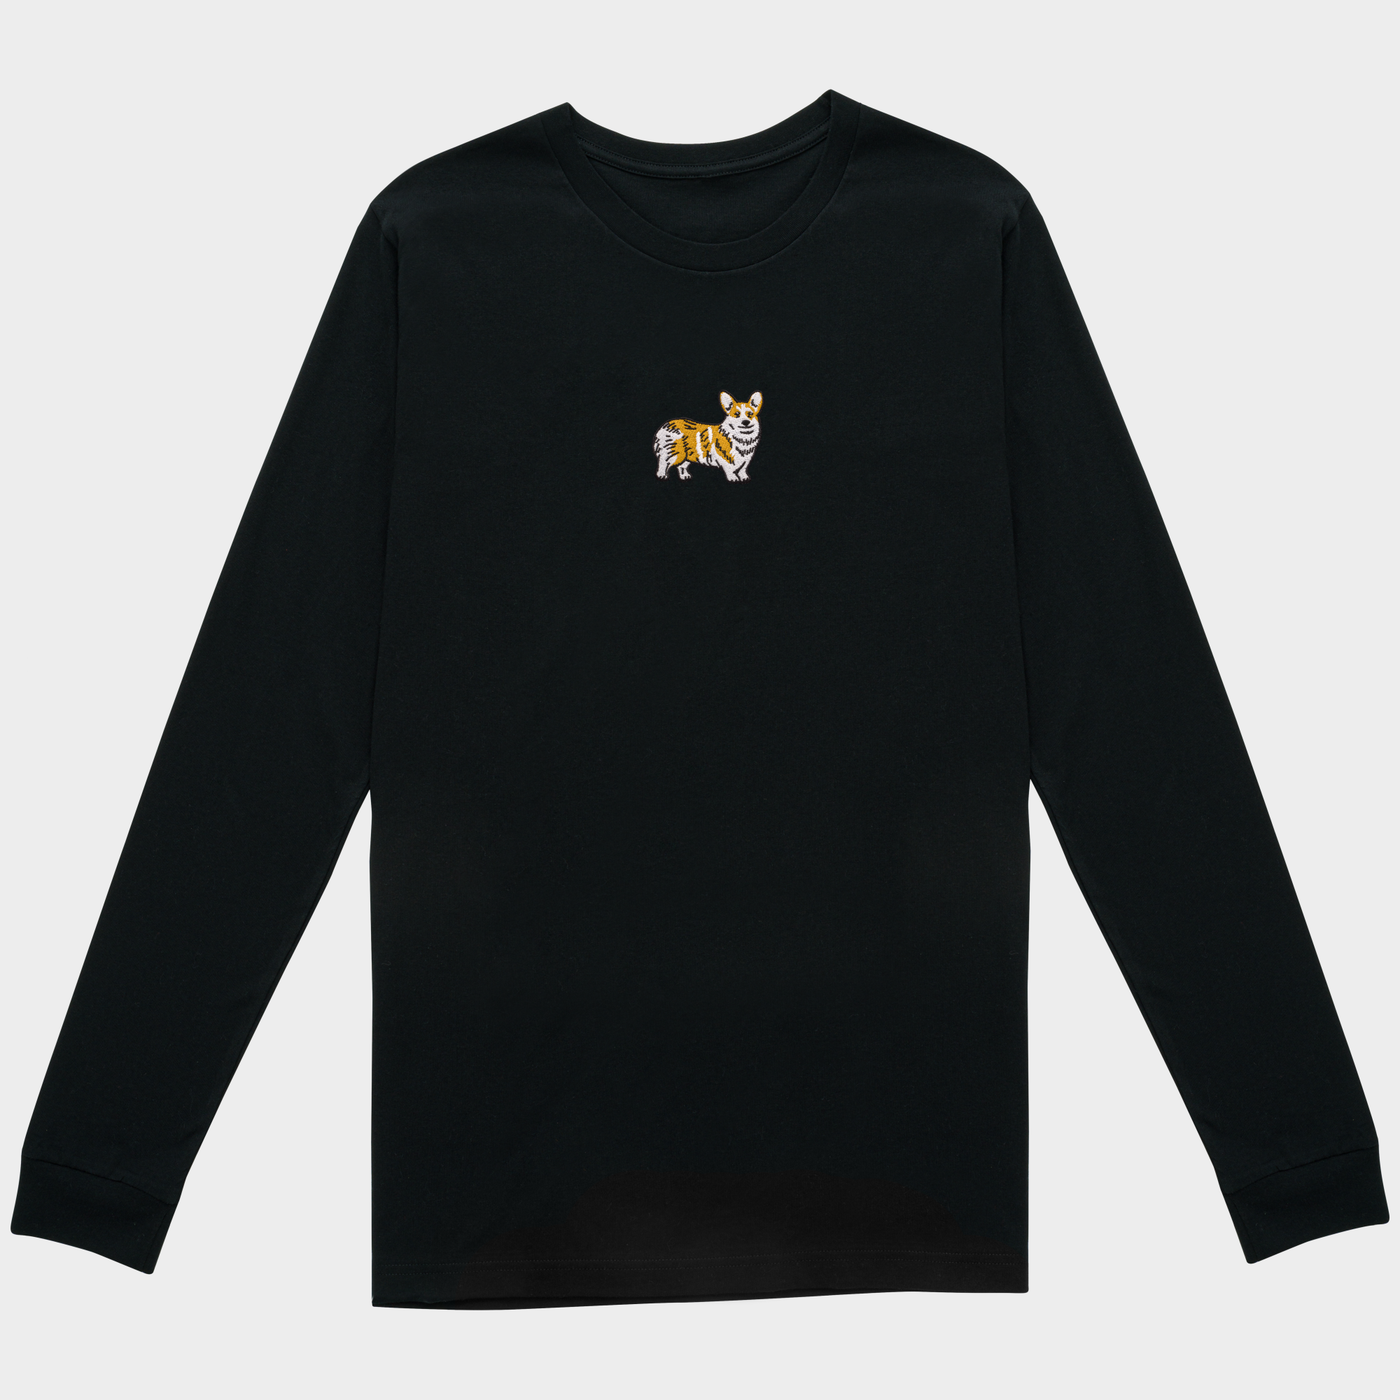 Bobby's Planet Men's Embroidered Corgi Long Sleeve Shirt from Paws Dog Cat Animals Collection in Black Color#color_black